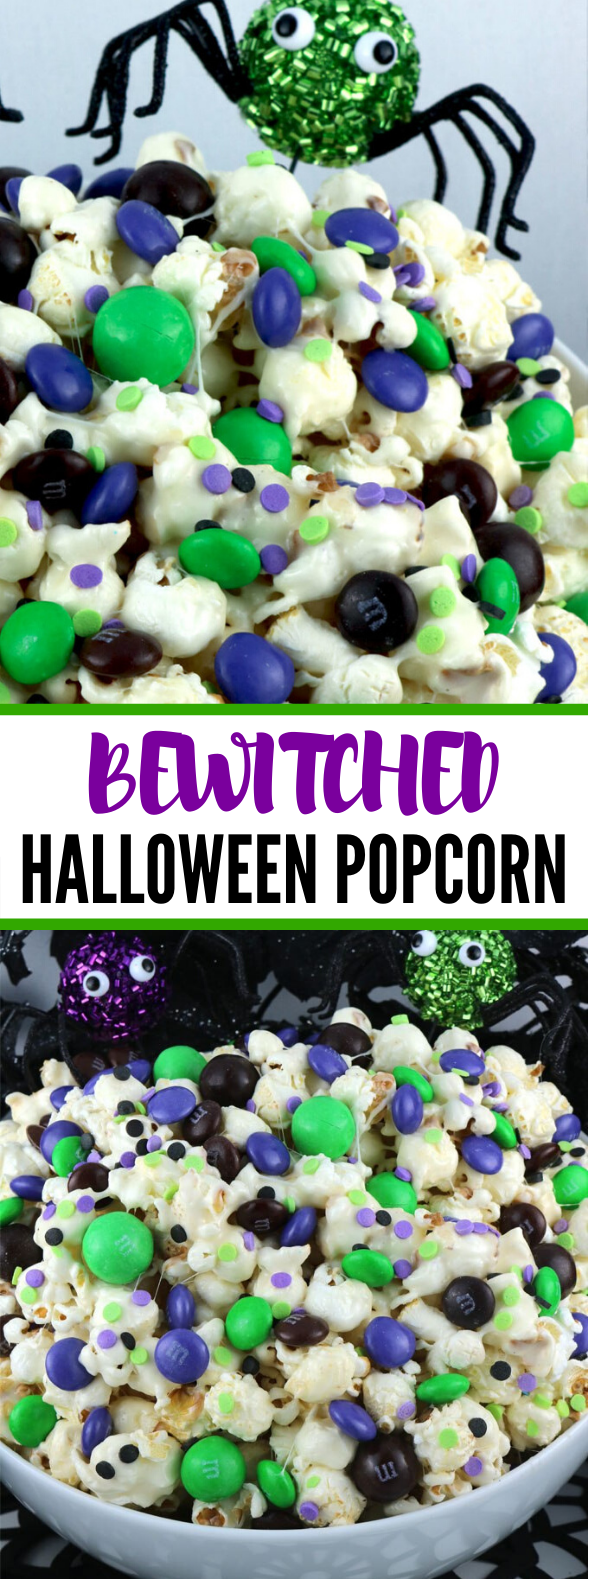 BEWITCHED HALLOWEEN POPCORN #desserts #sweets